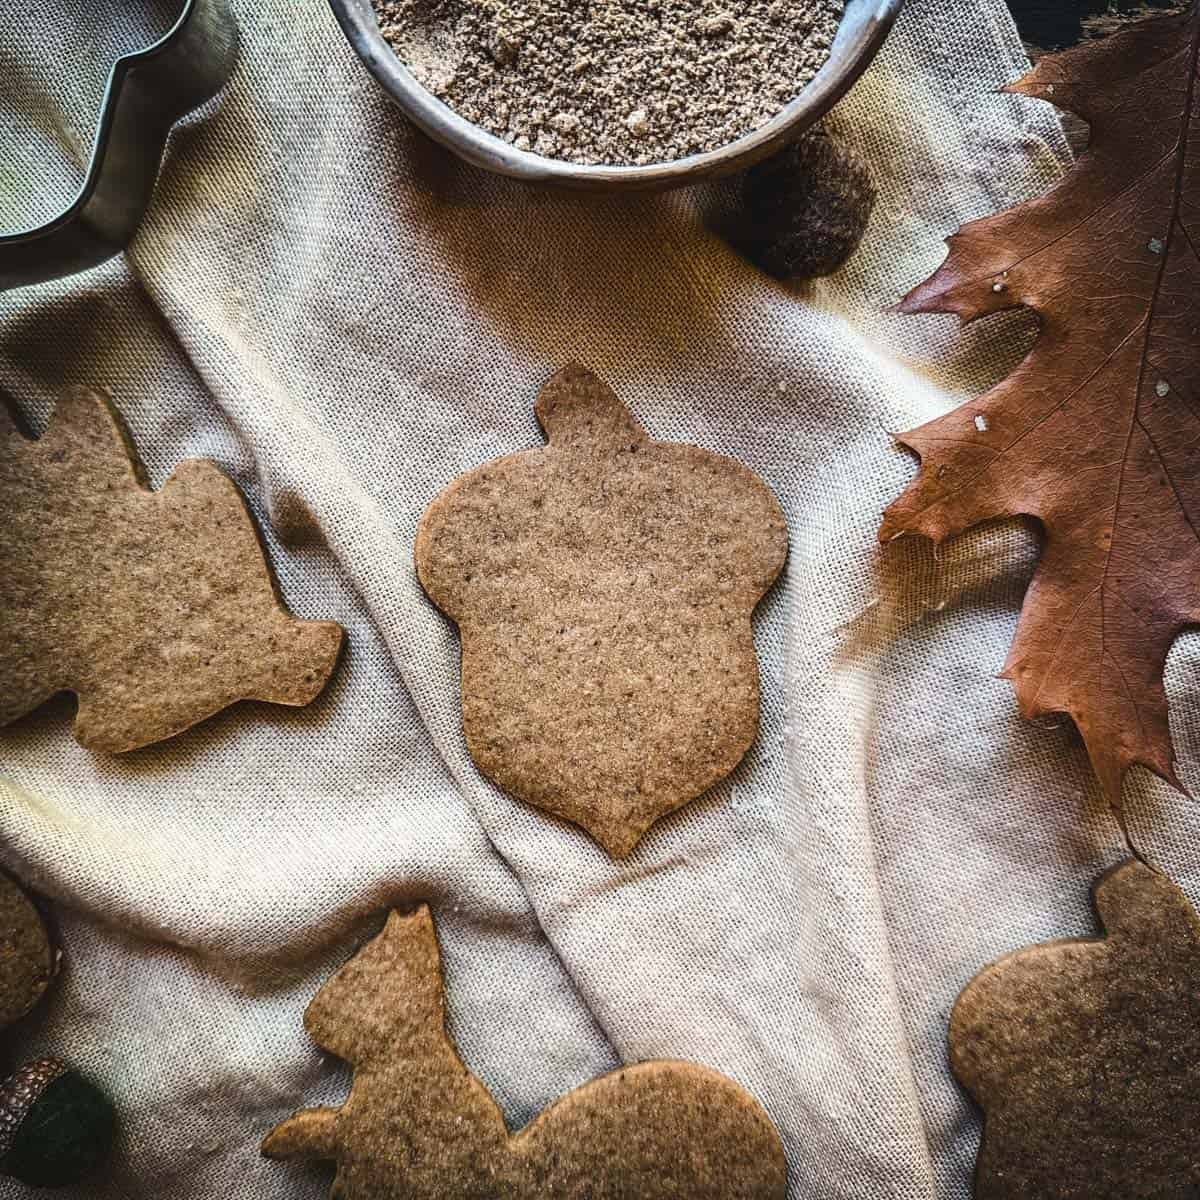 Acorn flour cookies in the shape of leaves, squirrels, and acorns on a natural white cloth surrounded by fall leaves and a bowl of acorn flour.